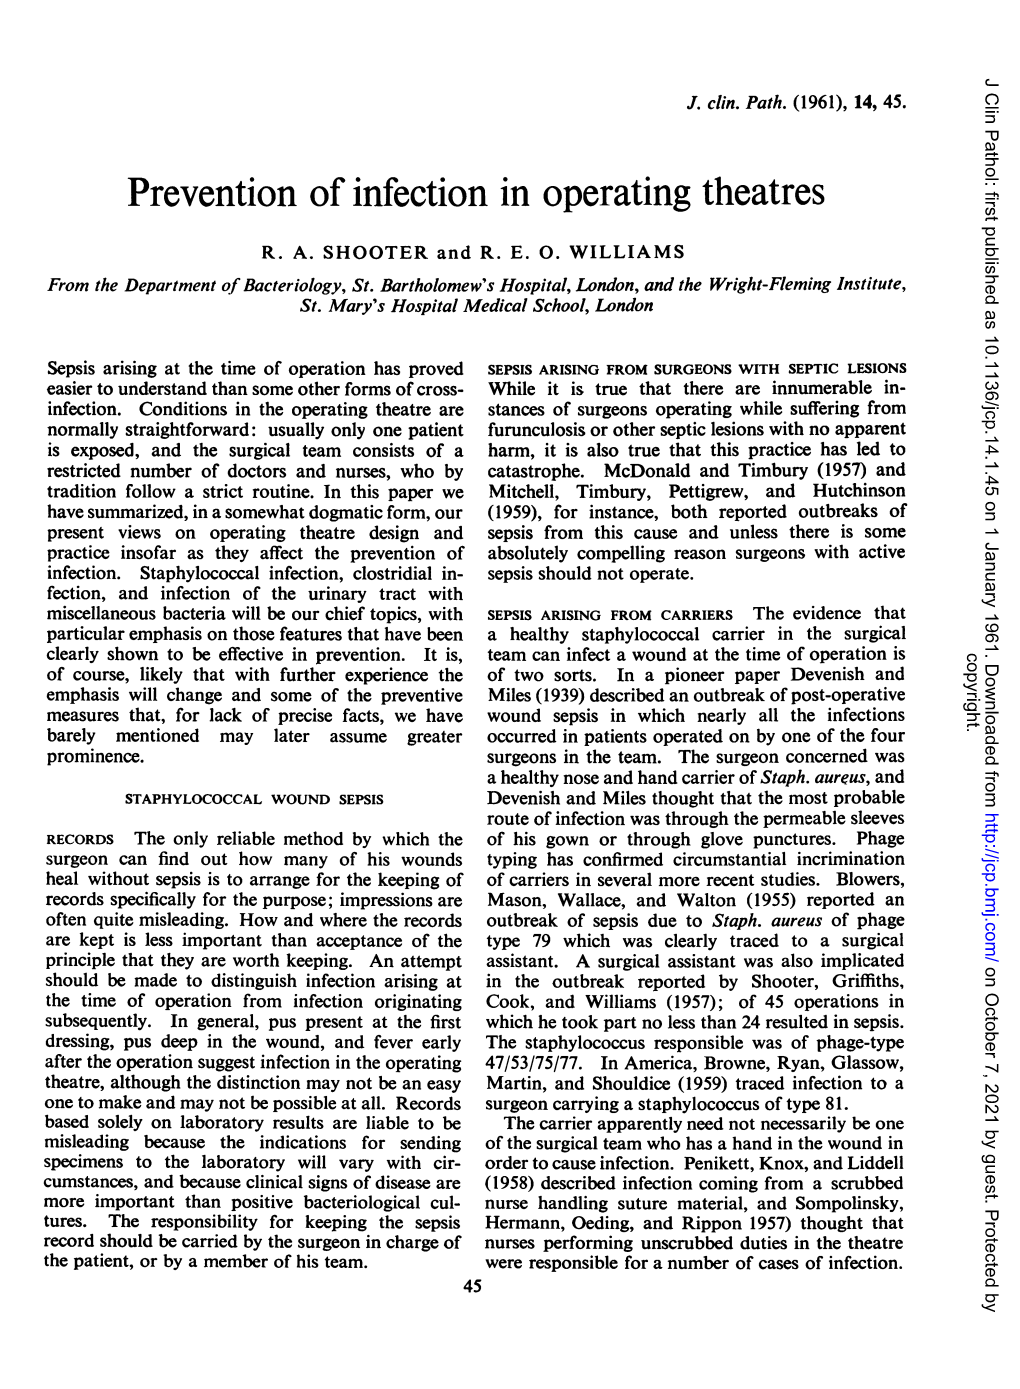 Prevention of Infection in Operating Theatres